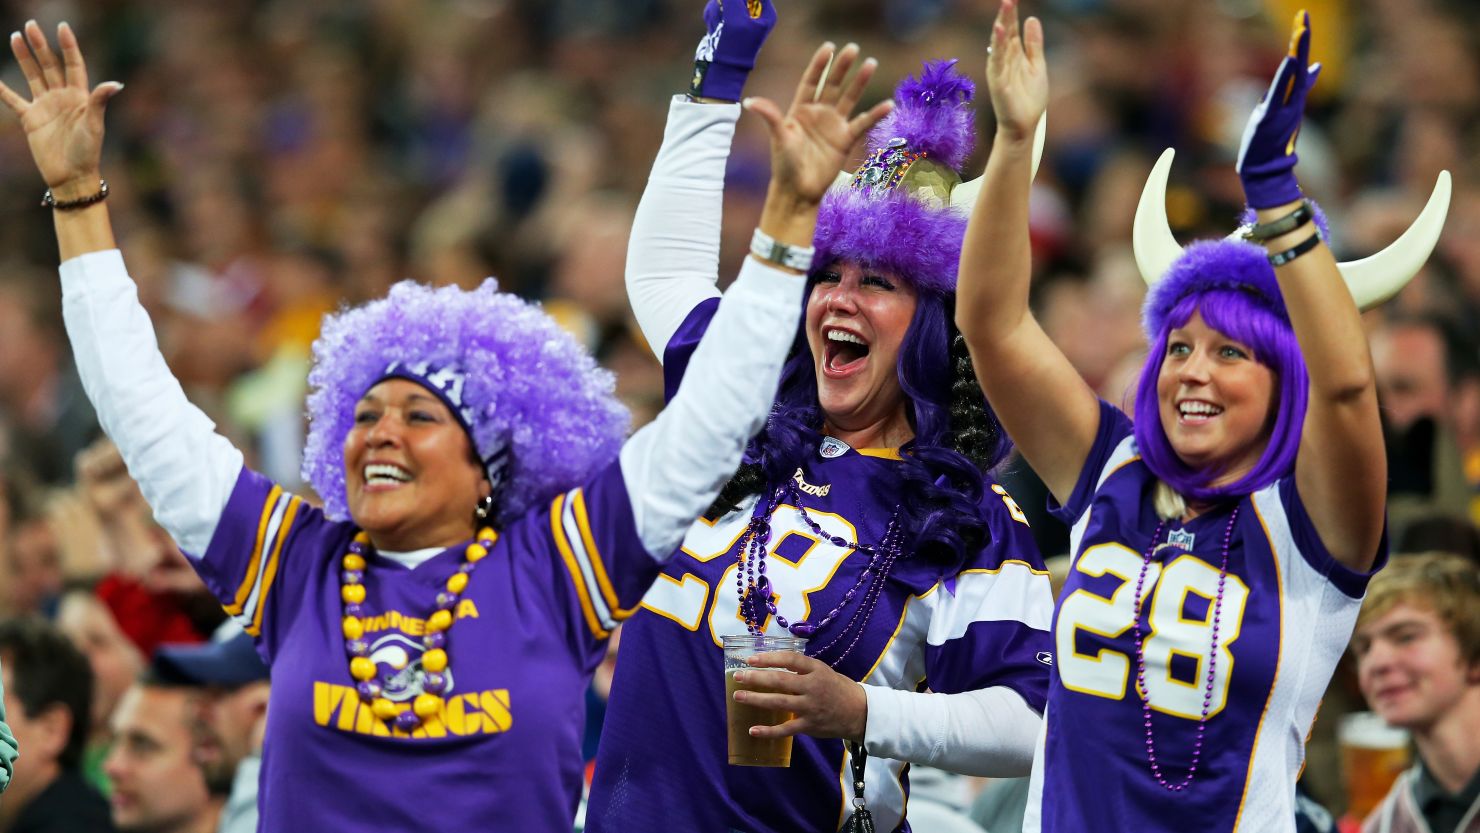 NFL was a hit with the European fans when the Minnesota Vikings played the Pittsburgh Steelers